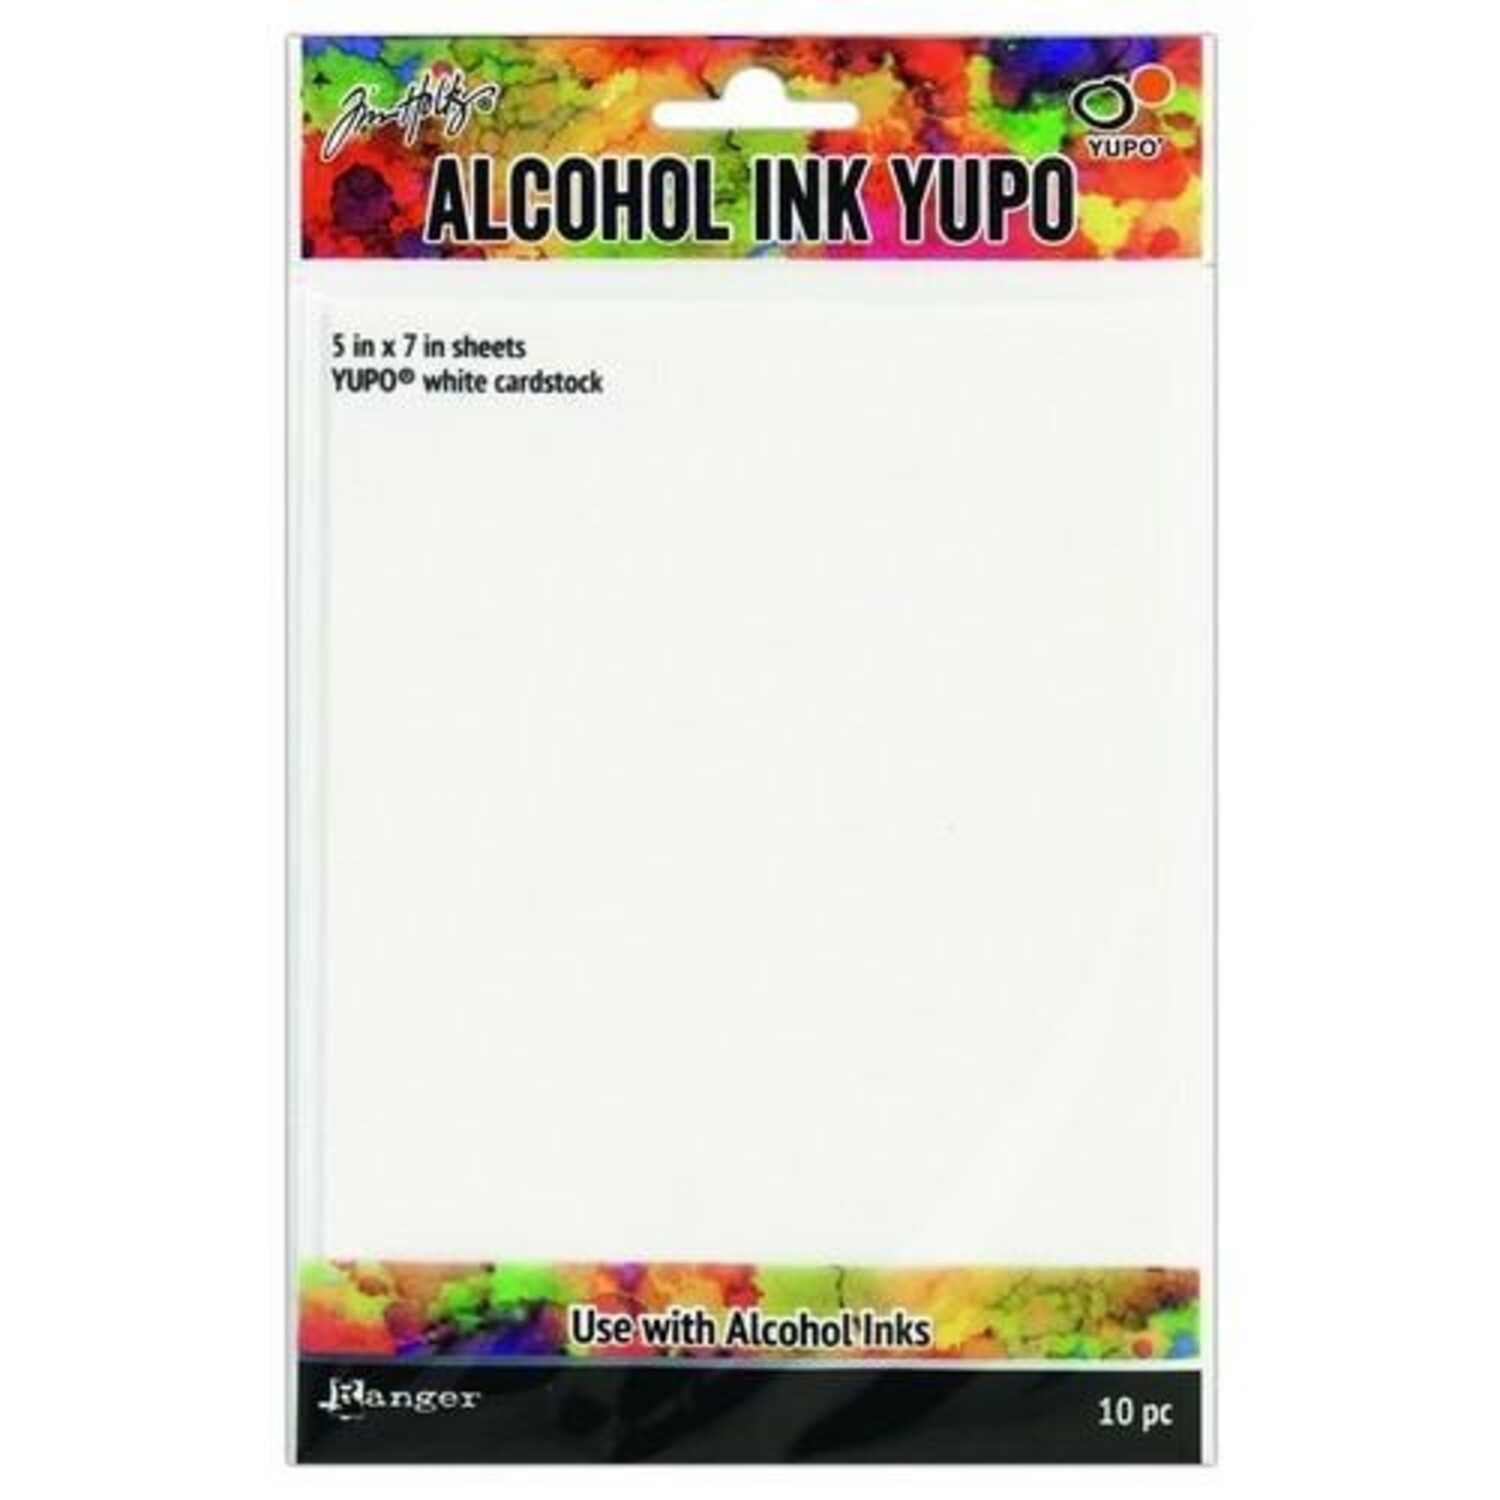 Yupo Paper for Alcohol Ink - White A5 Pack of 10, Alcohol Inks